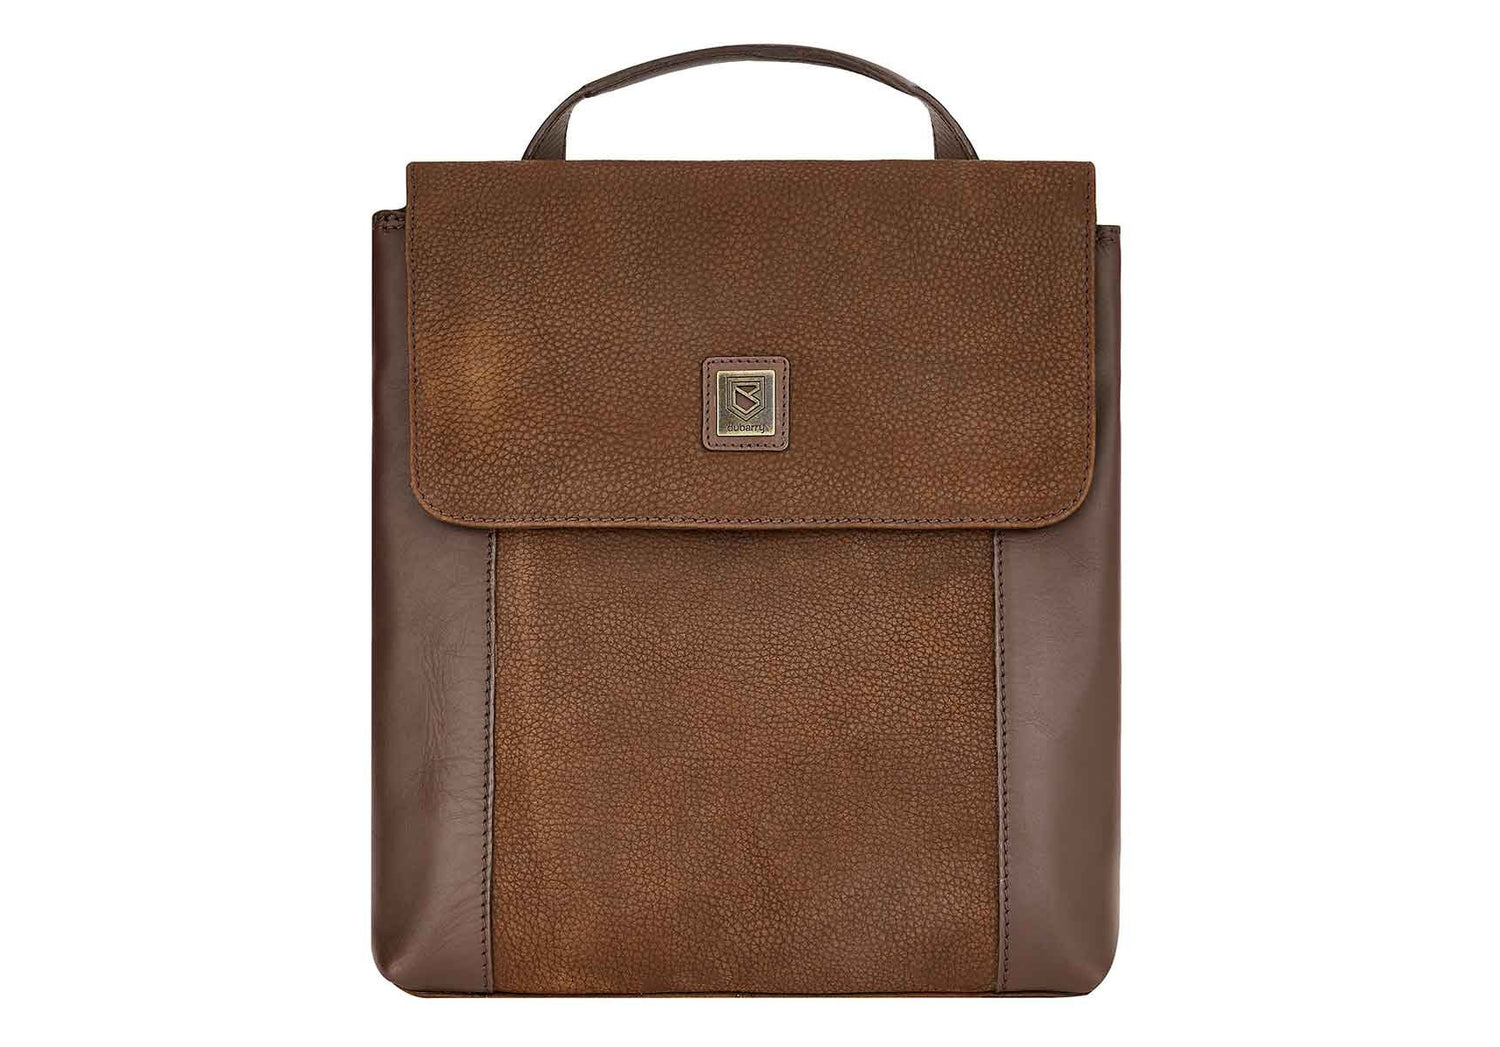 Dubarry Dingle Bag for Ladies in Walnut